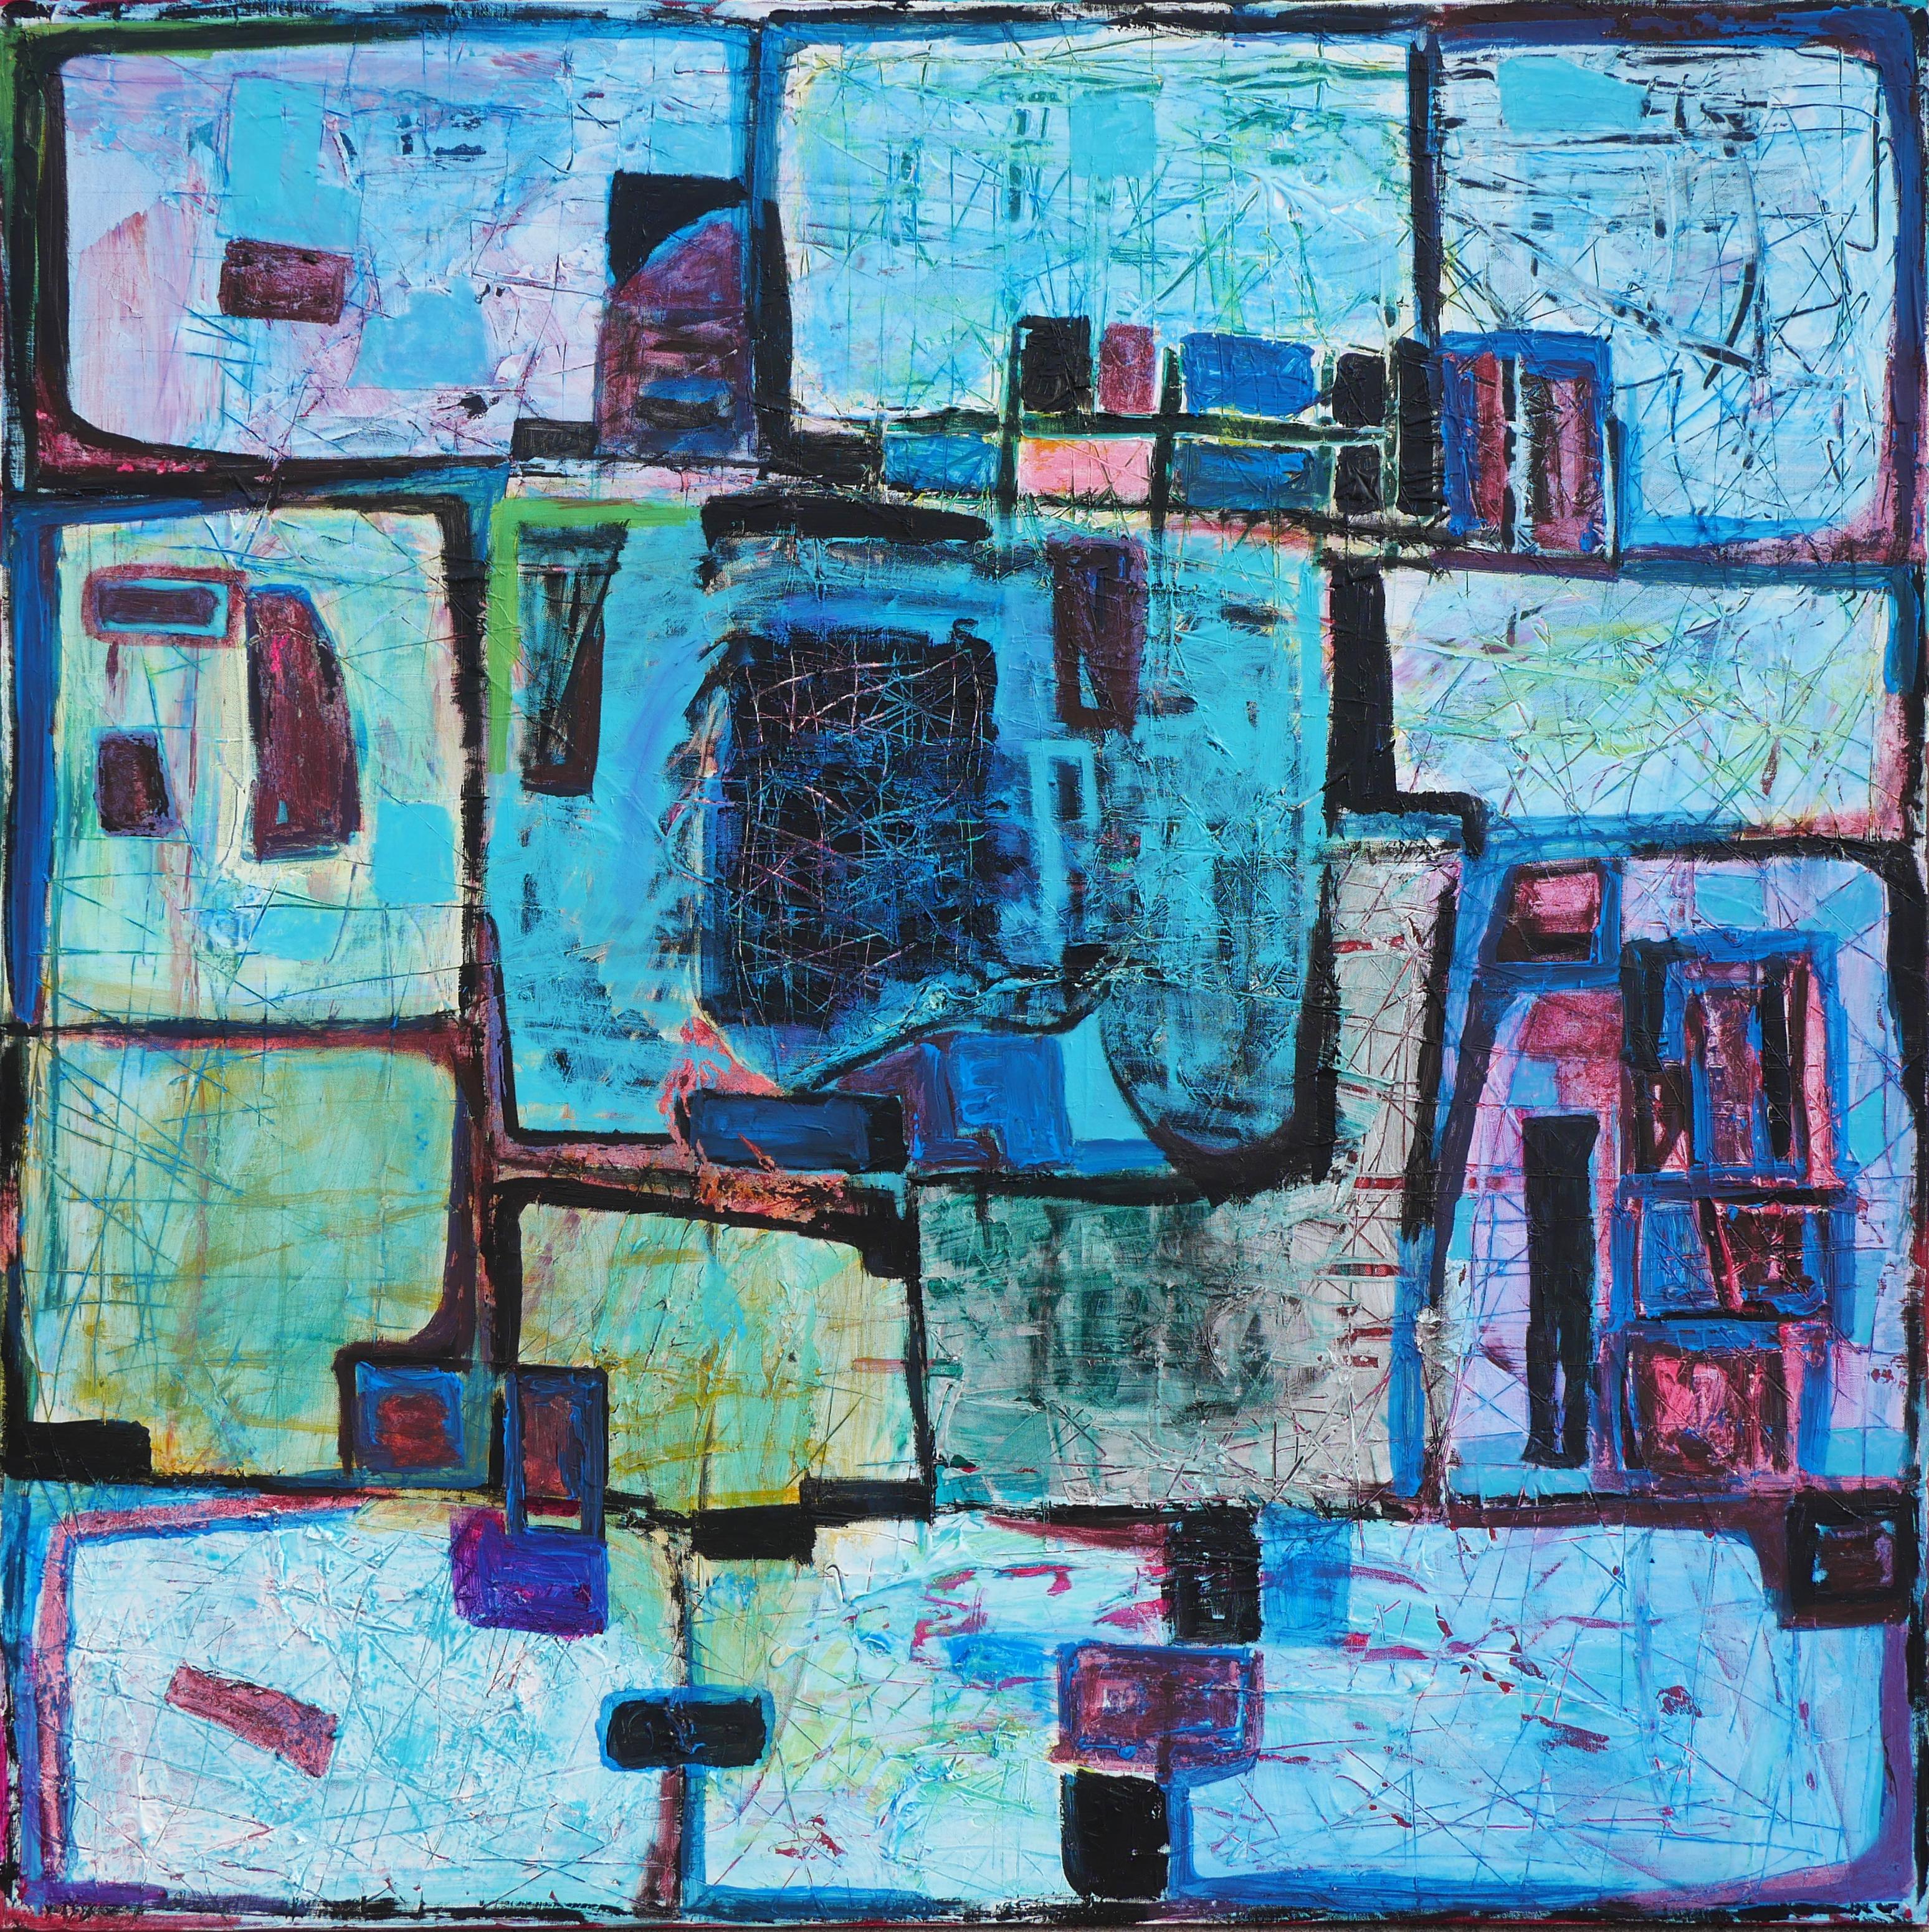 Paul Reeves Abstract Painting - "Chaos" Contemporary Blue, Green, & Pink Cubist Abstract Expressionist Painting